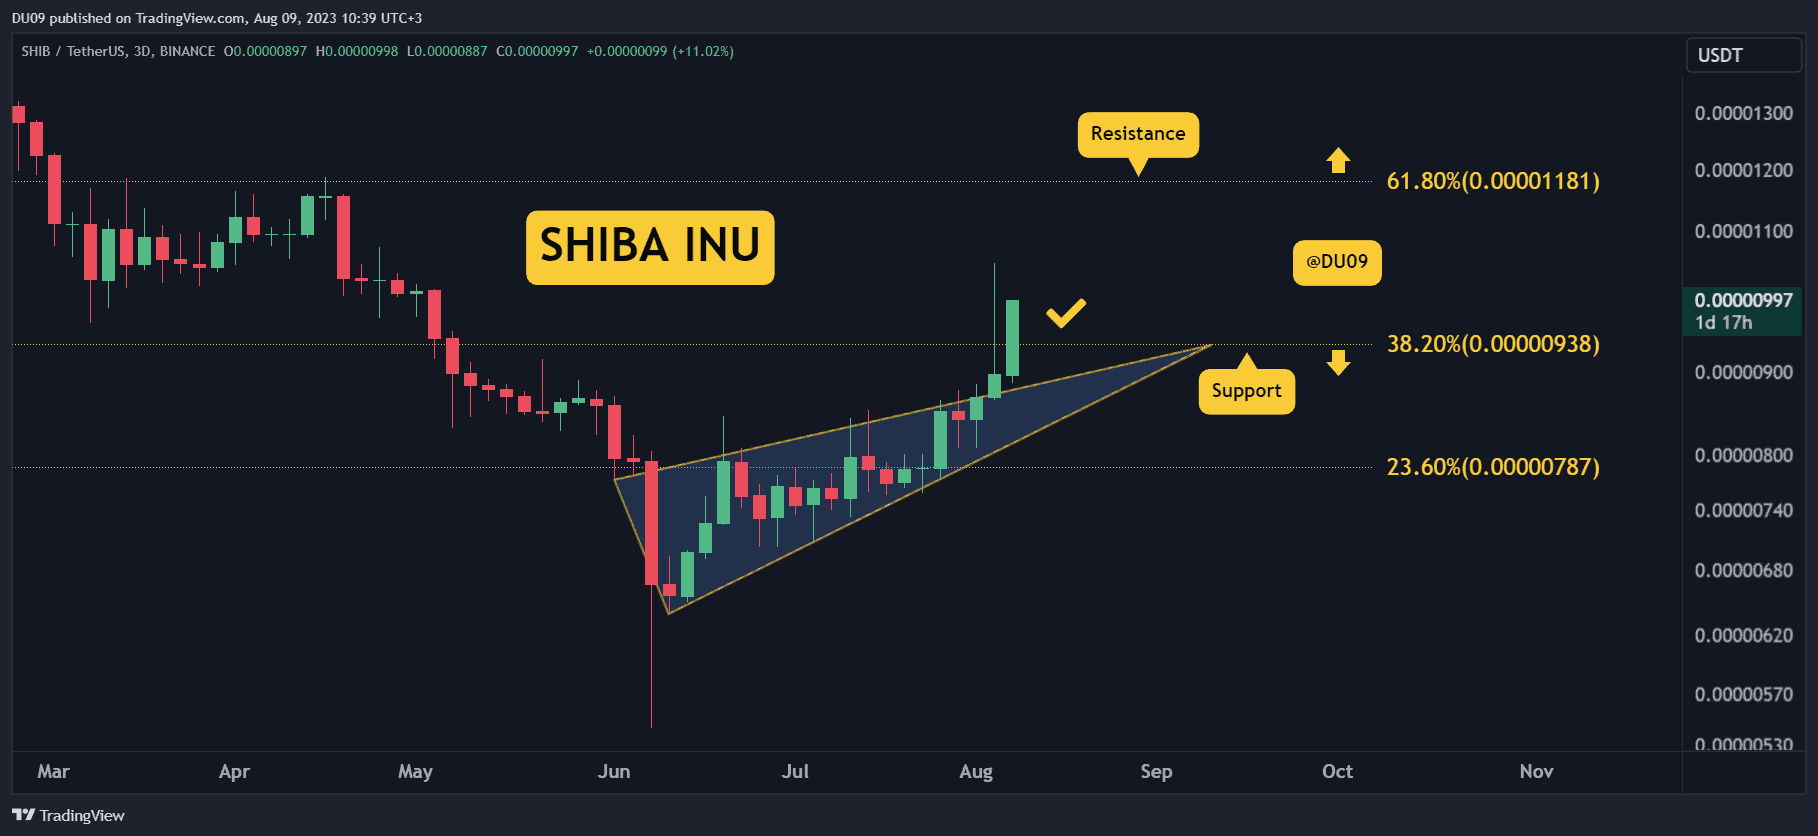 SHIB Confirms Breakout With 10% Surge: Here’s the Next Target (Shiba Inu Price Analysis)